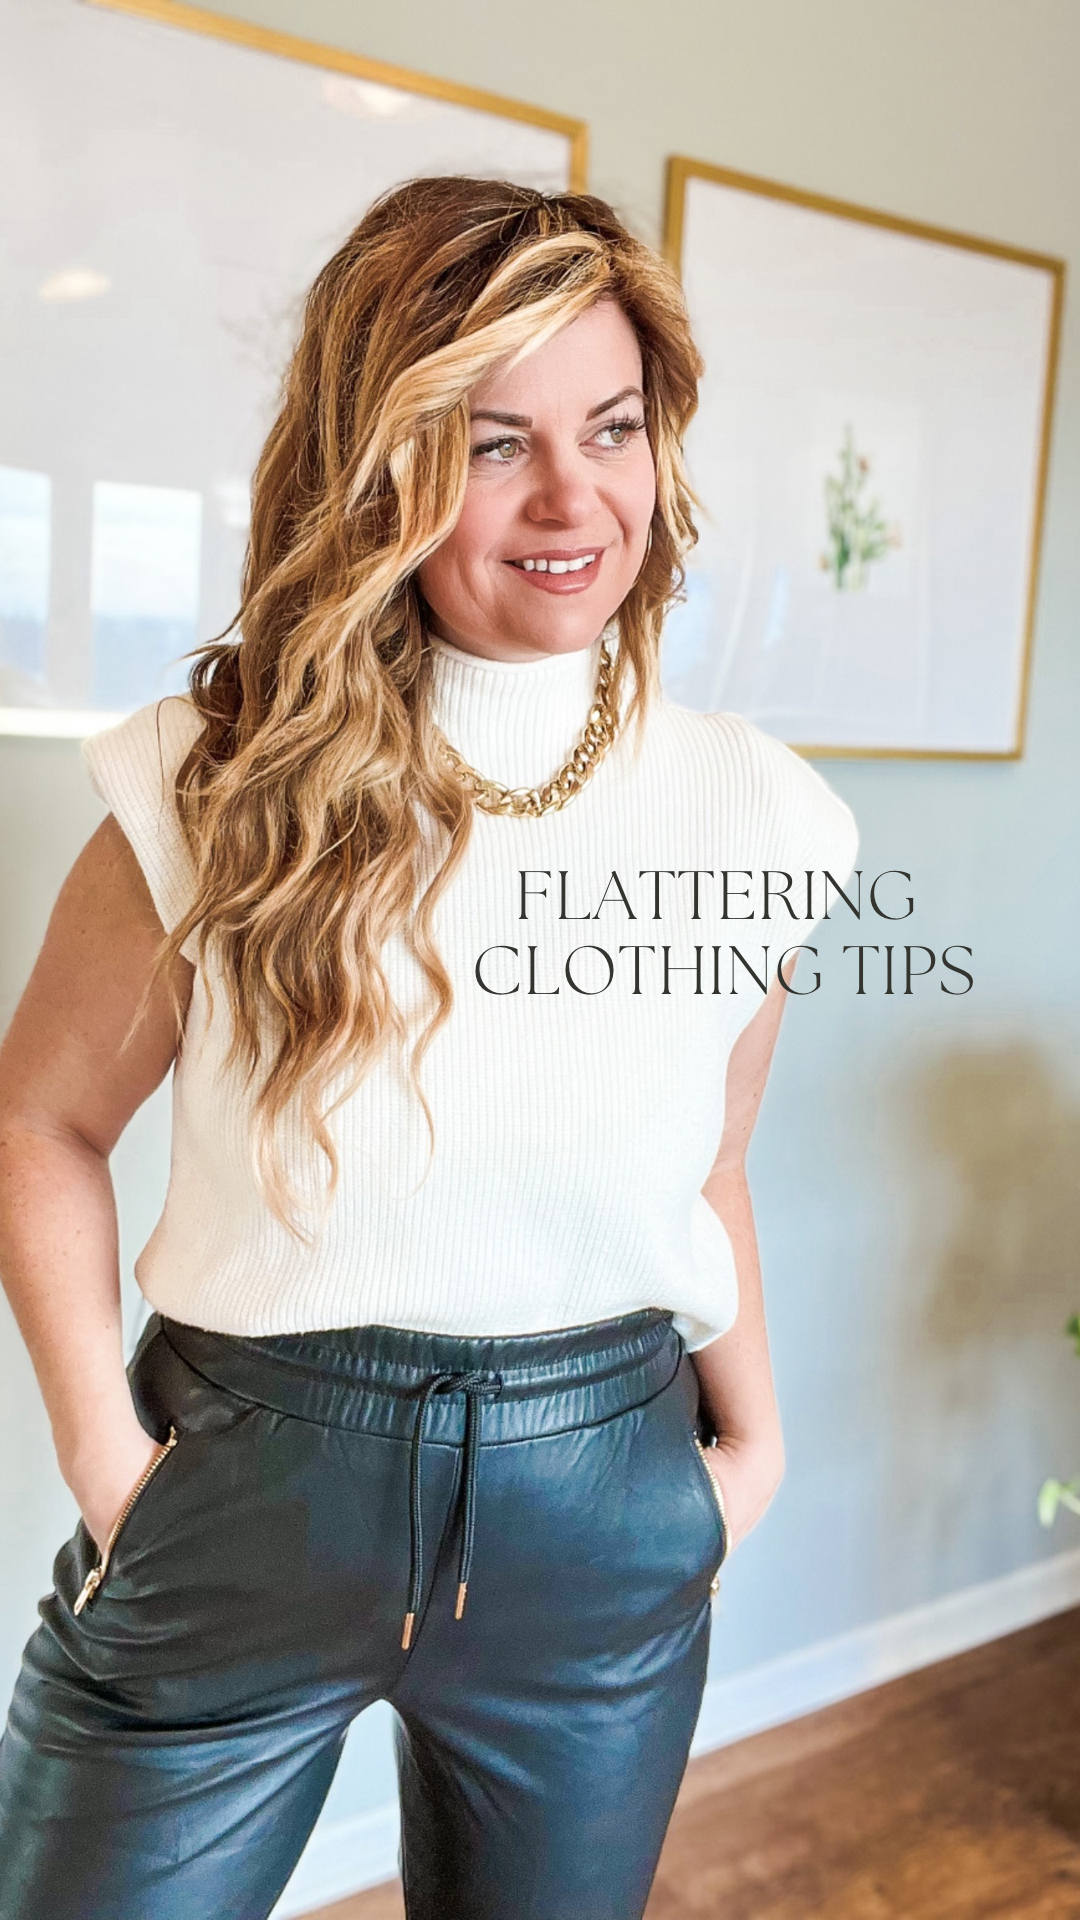 Stylist Brandi Sharp Flattering Outfit Ideas Outfit Ideas Black Leather Joggers How to style joggers Capped sleeves gold simple jewlery stylist beauty blogger